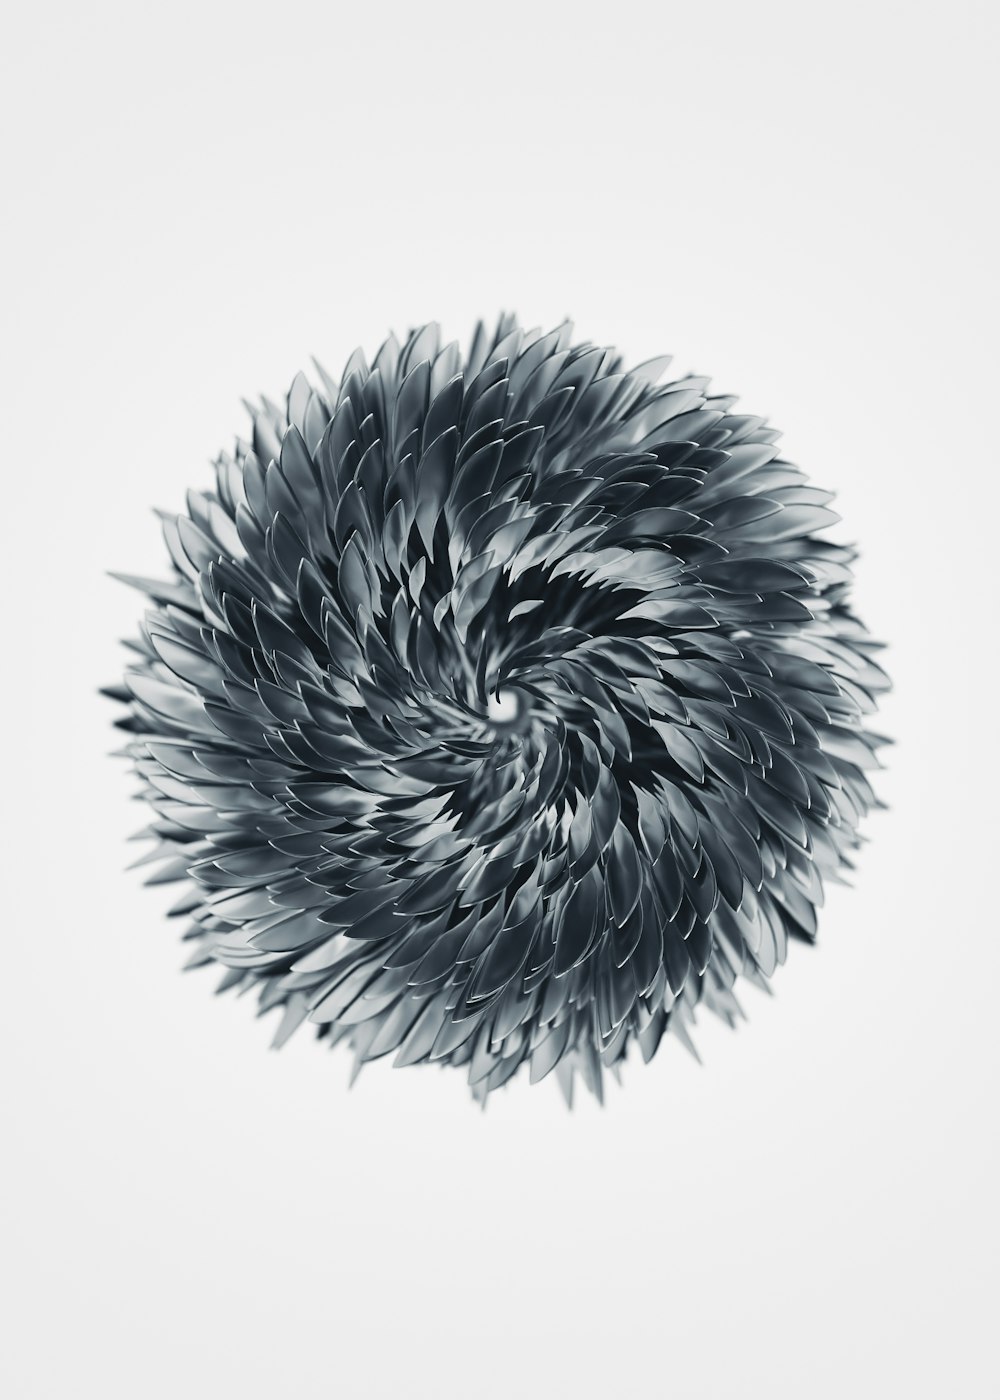 a black feather on a white background